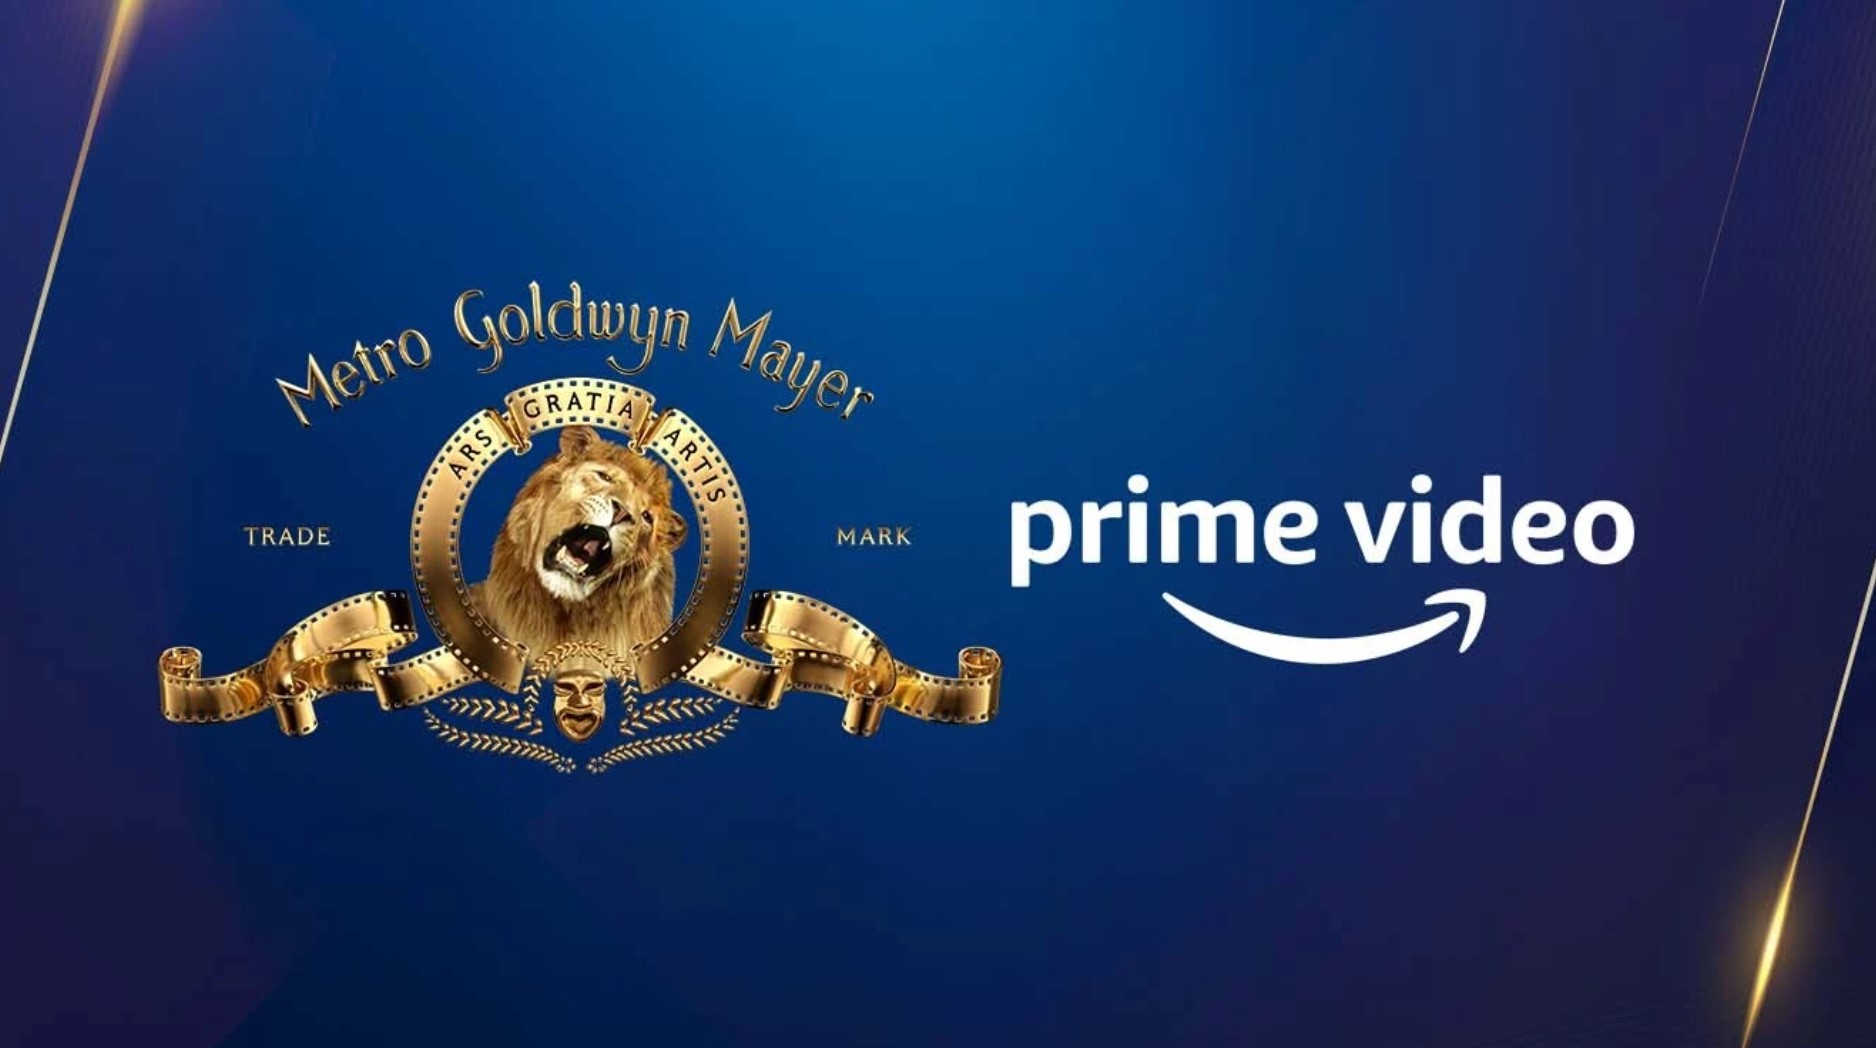 Amazon Acquires MGM In $8.5 Billion Deal